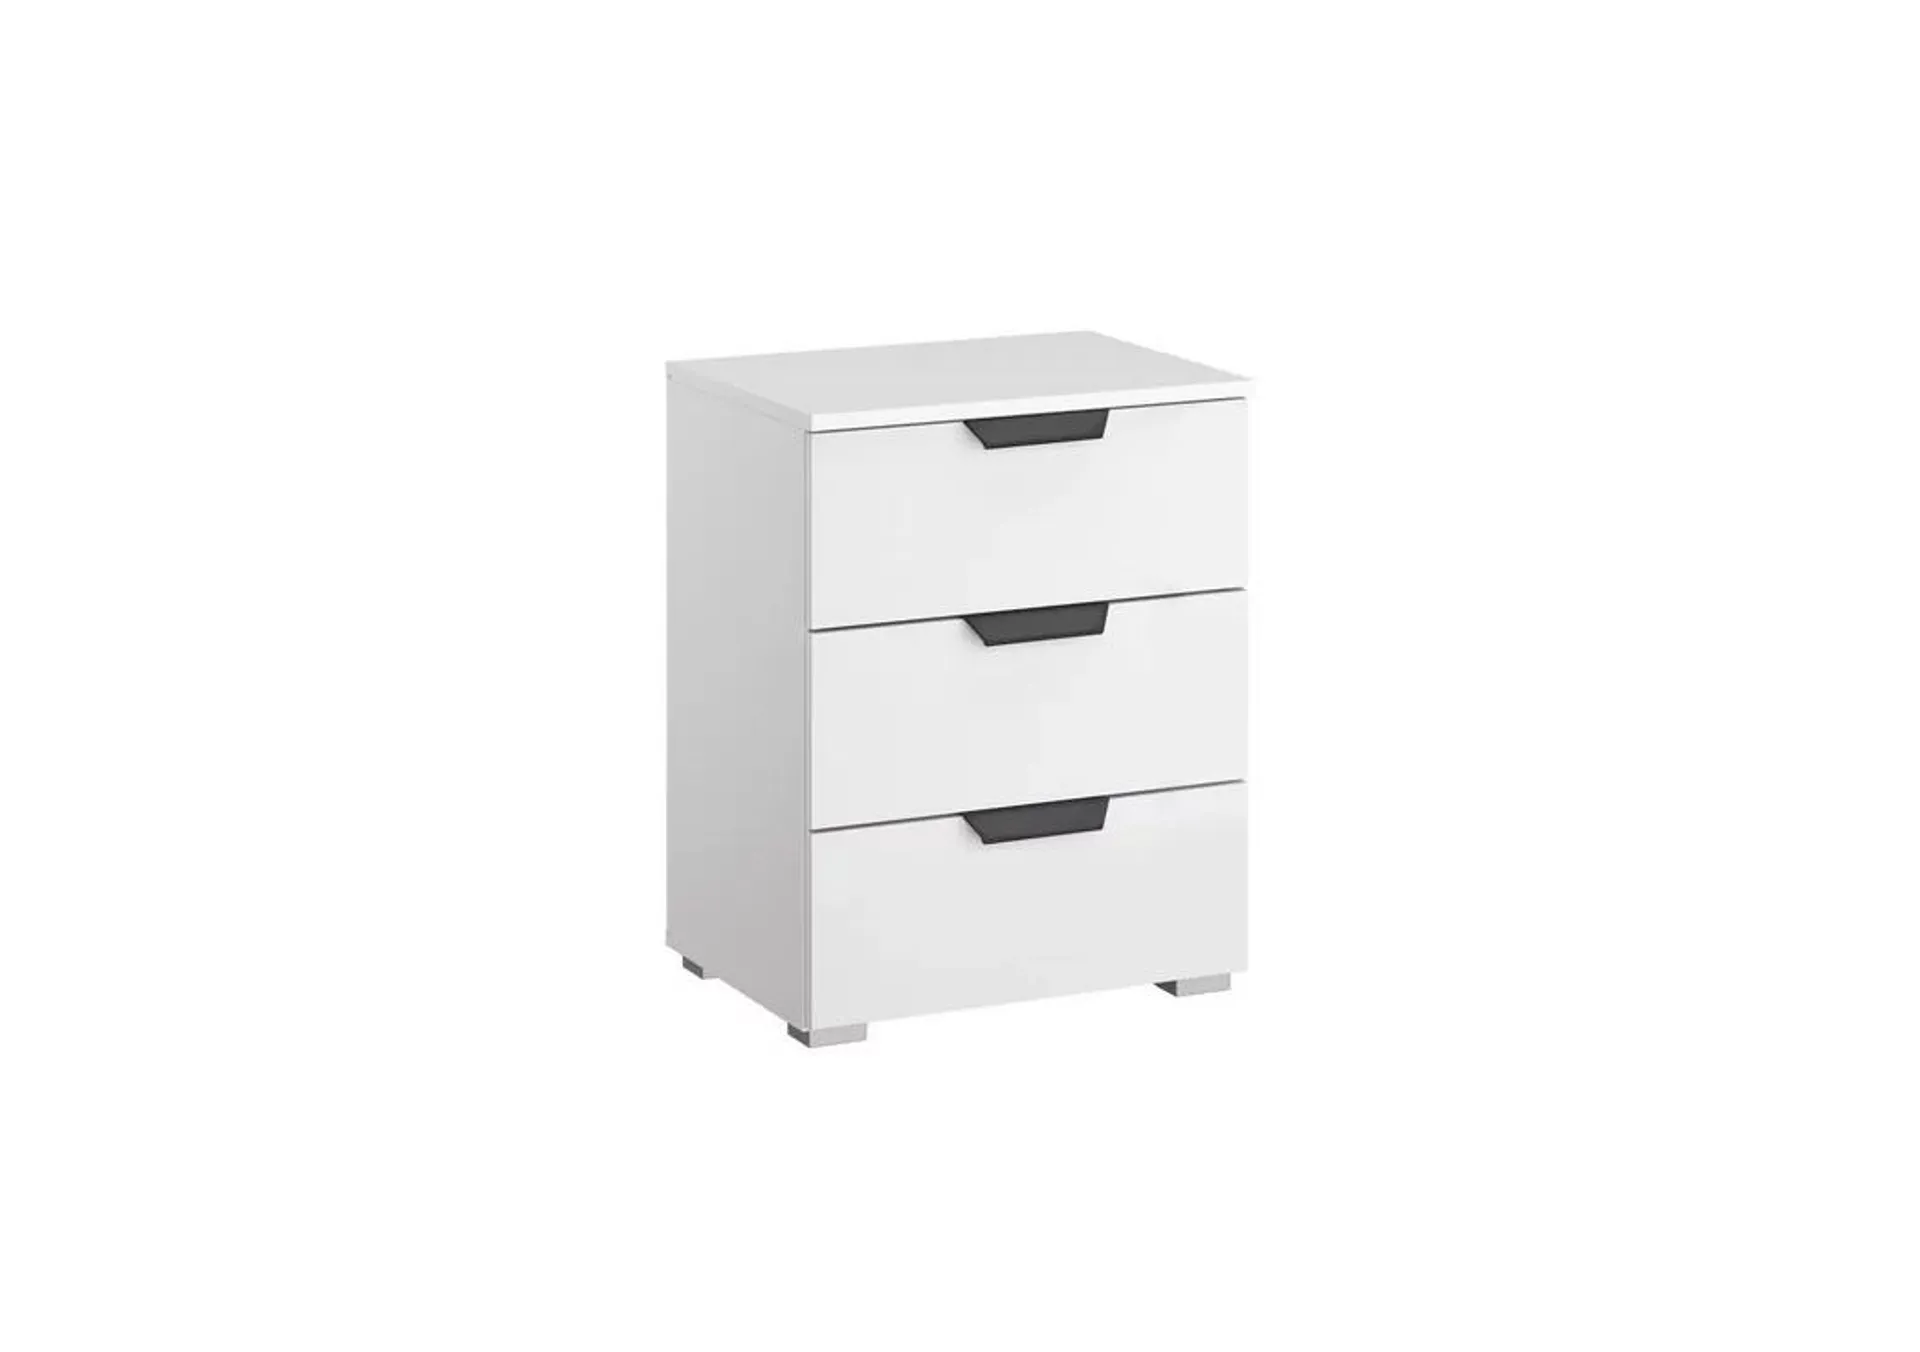 Lima 3 Drawer Bedside Cabinet with Decor Front